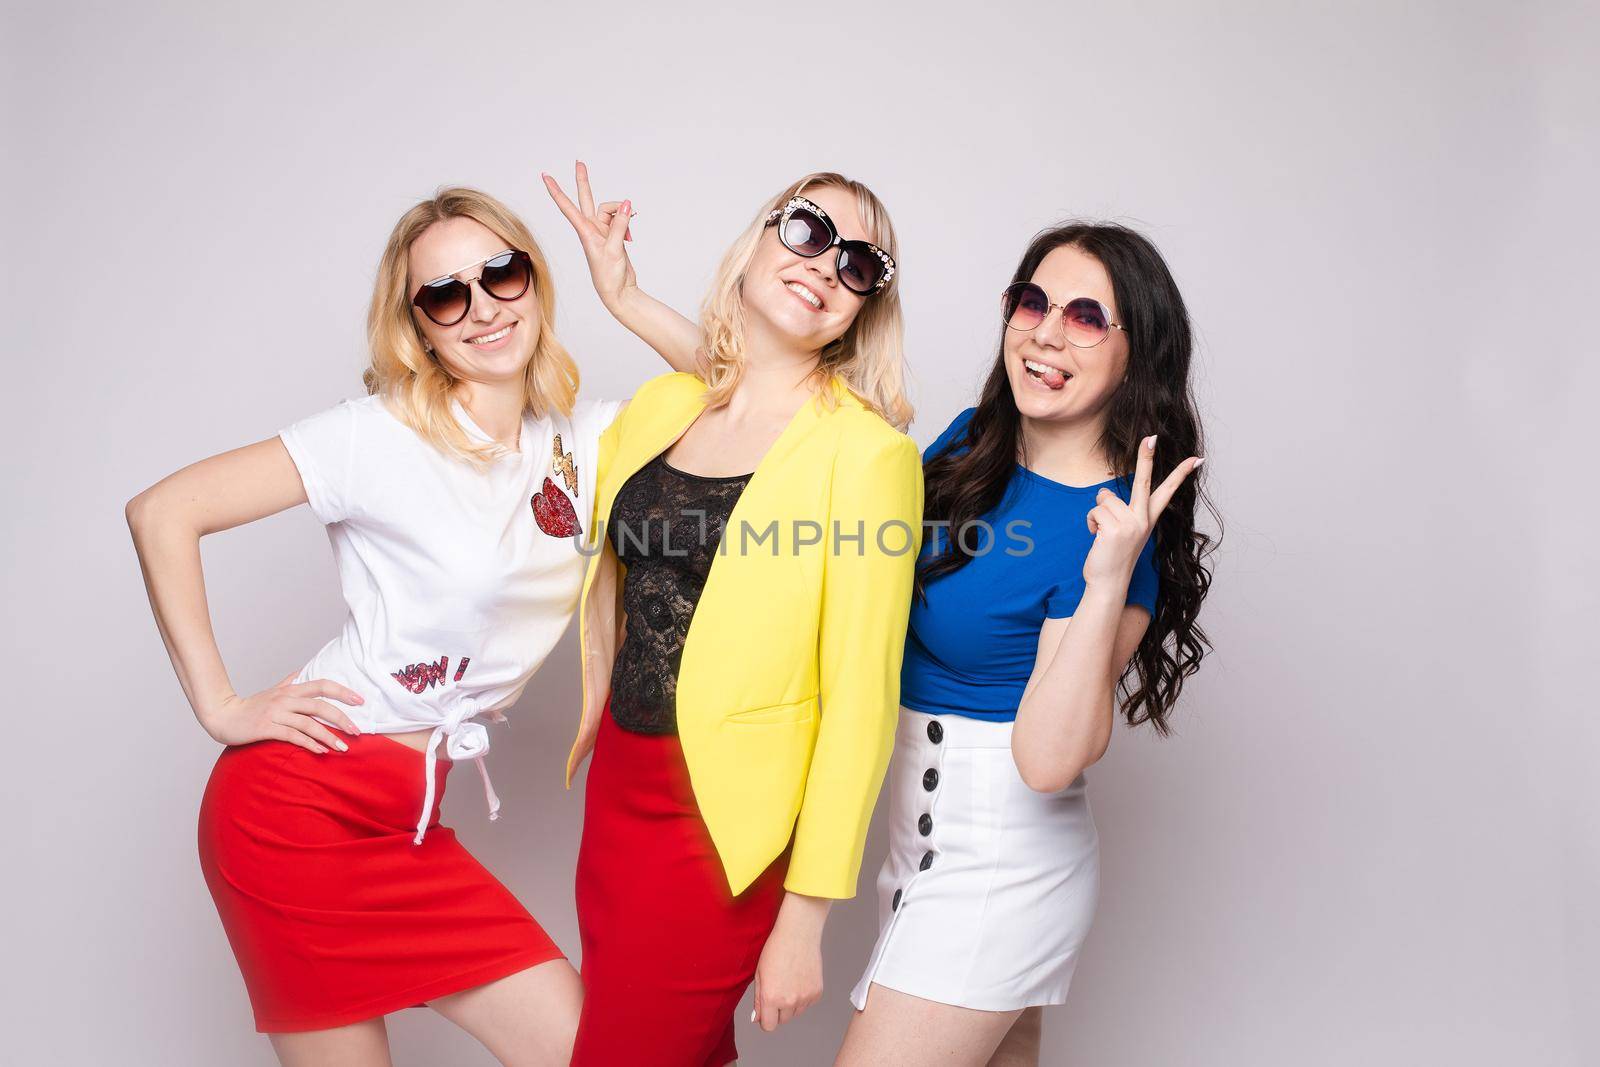 Three cheerful women wearing bright colorful skirts, shirts and glasses standing on grey isolated background. Happy girls looking at camera, laughing and showing tongue. Concept of happiness.